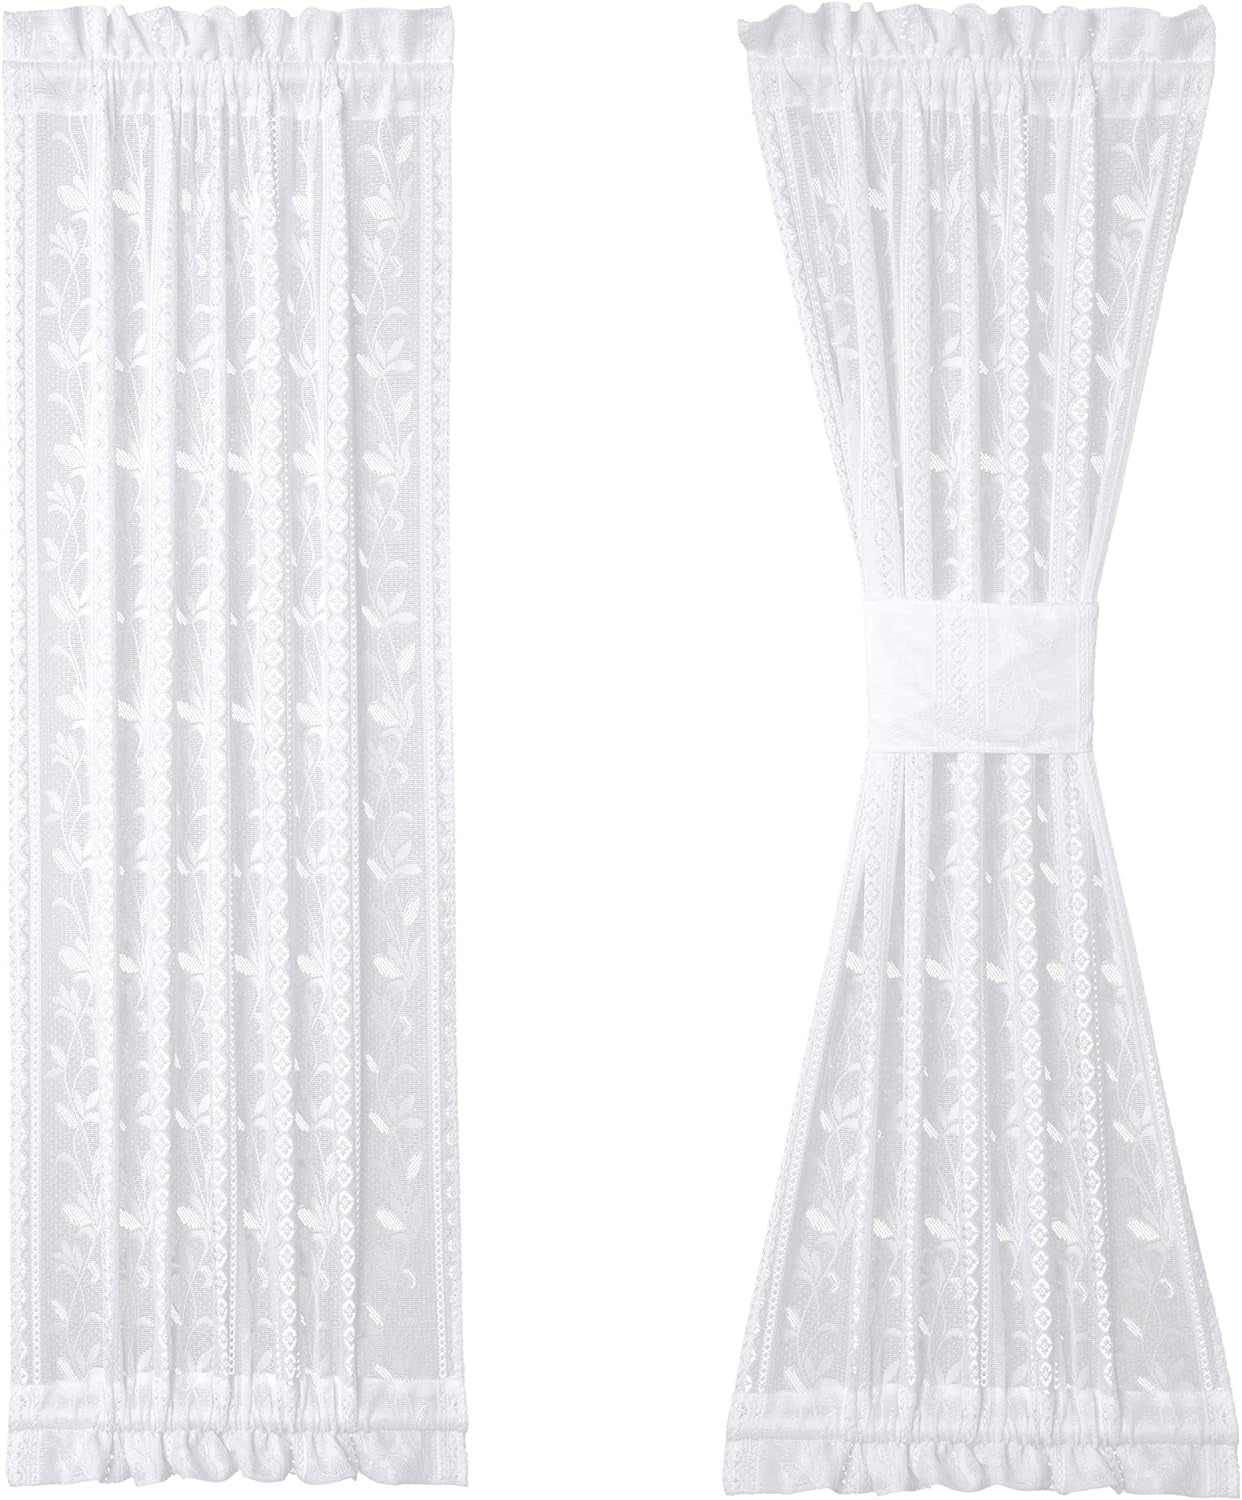 2 Pcs White Lace French Door Curtain Leaves Knitted Textured Voile Curtains 72 Inch Long Light Filtering Floral Sidelight Curtain Panel for Siding Glass Door Patio Front Door Tie-Backs Included  RLoncomix White 24" X 40" 2 Pcs 